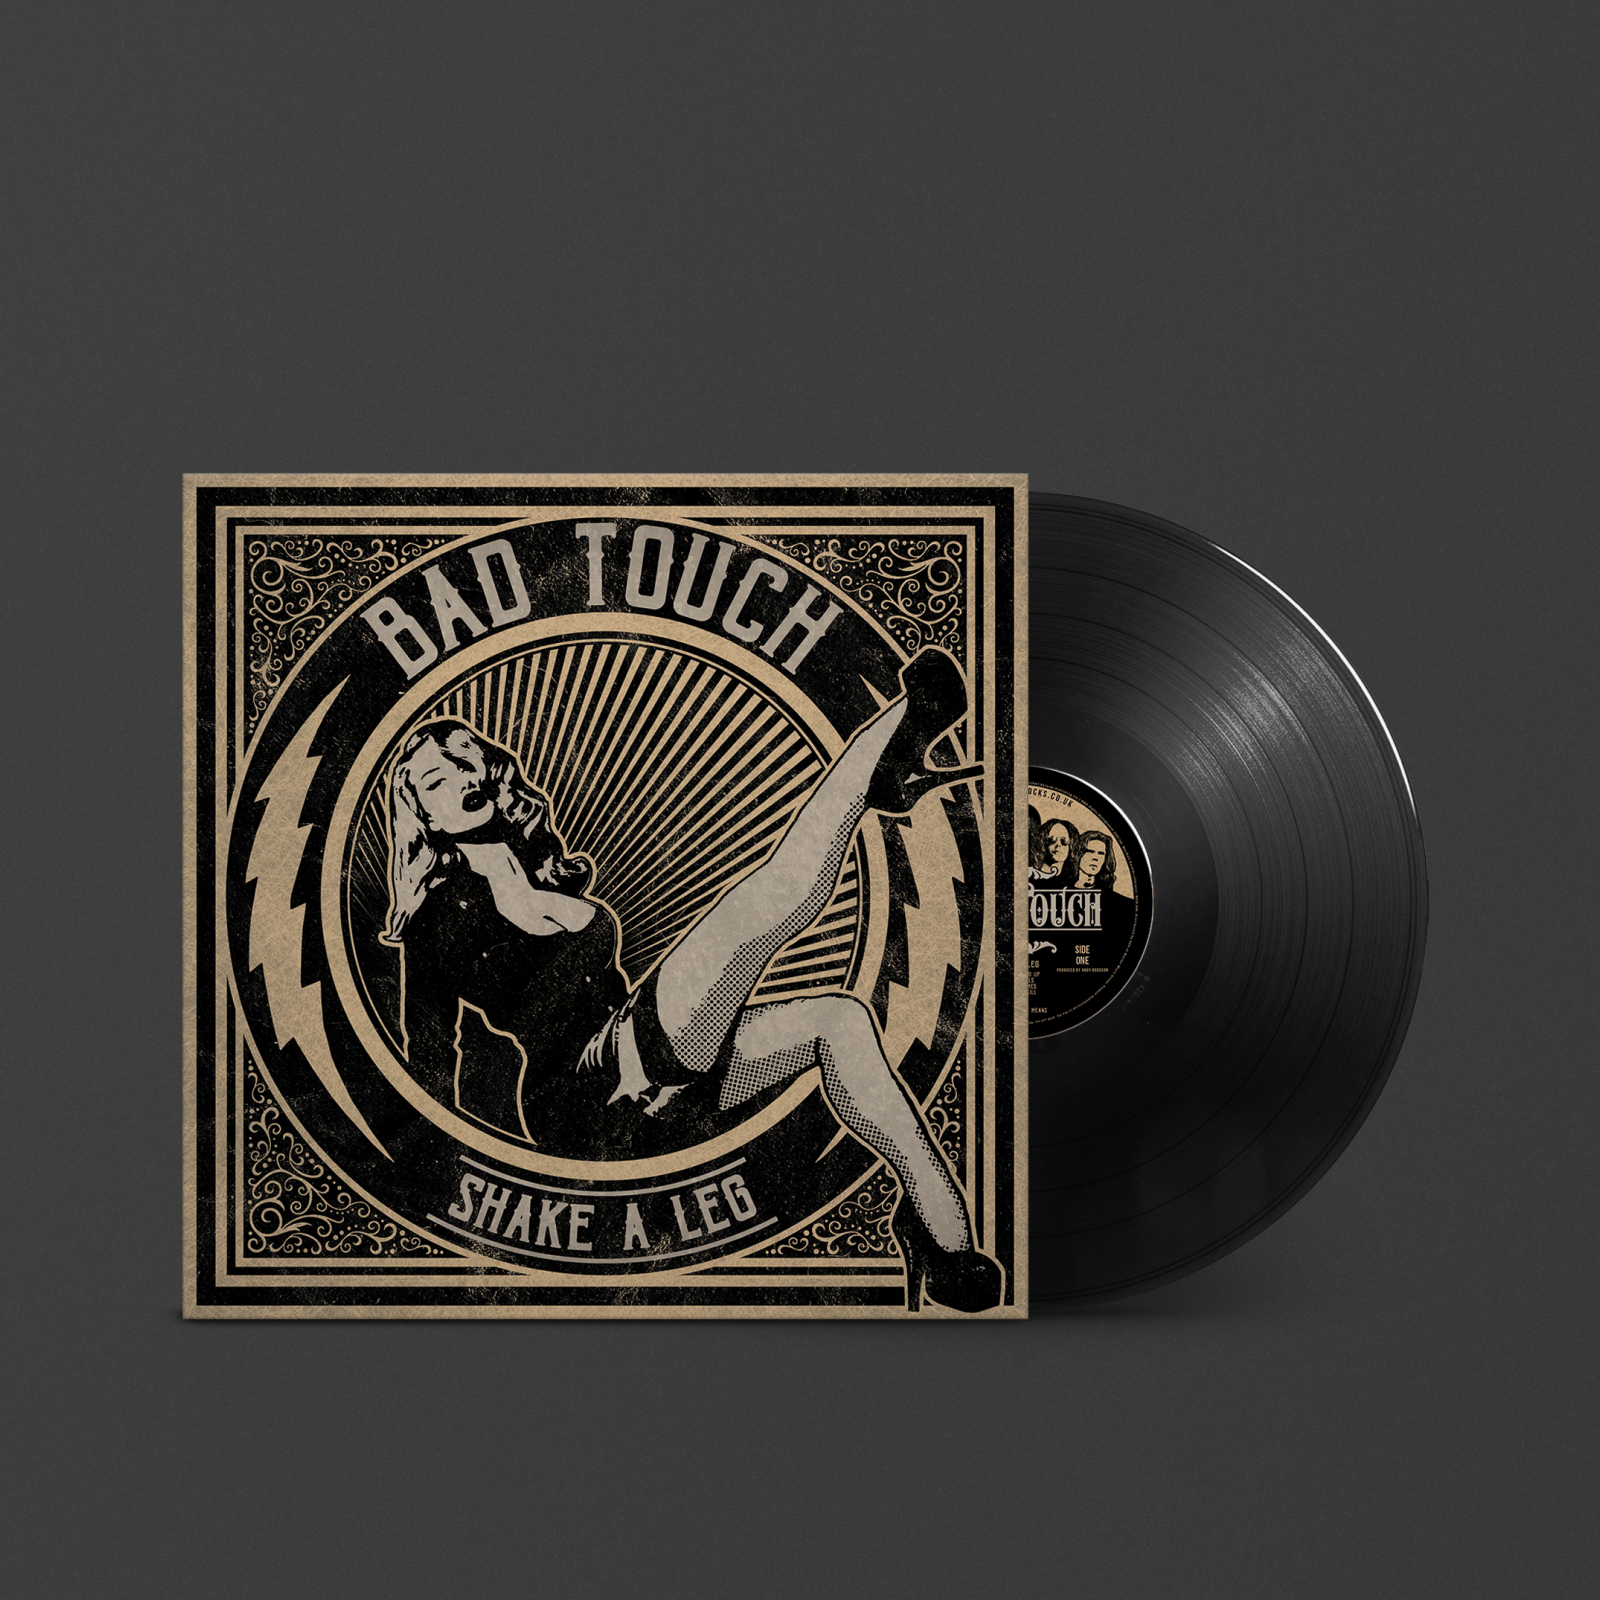 Shake a Leg Vynil by Bad Touch